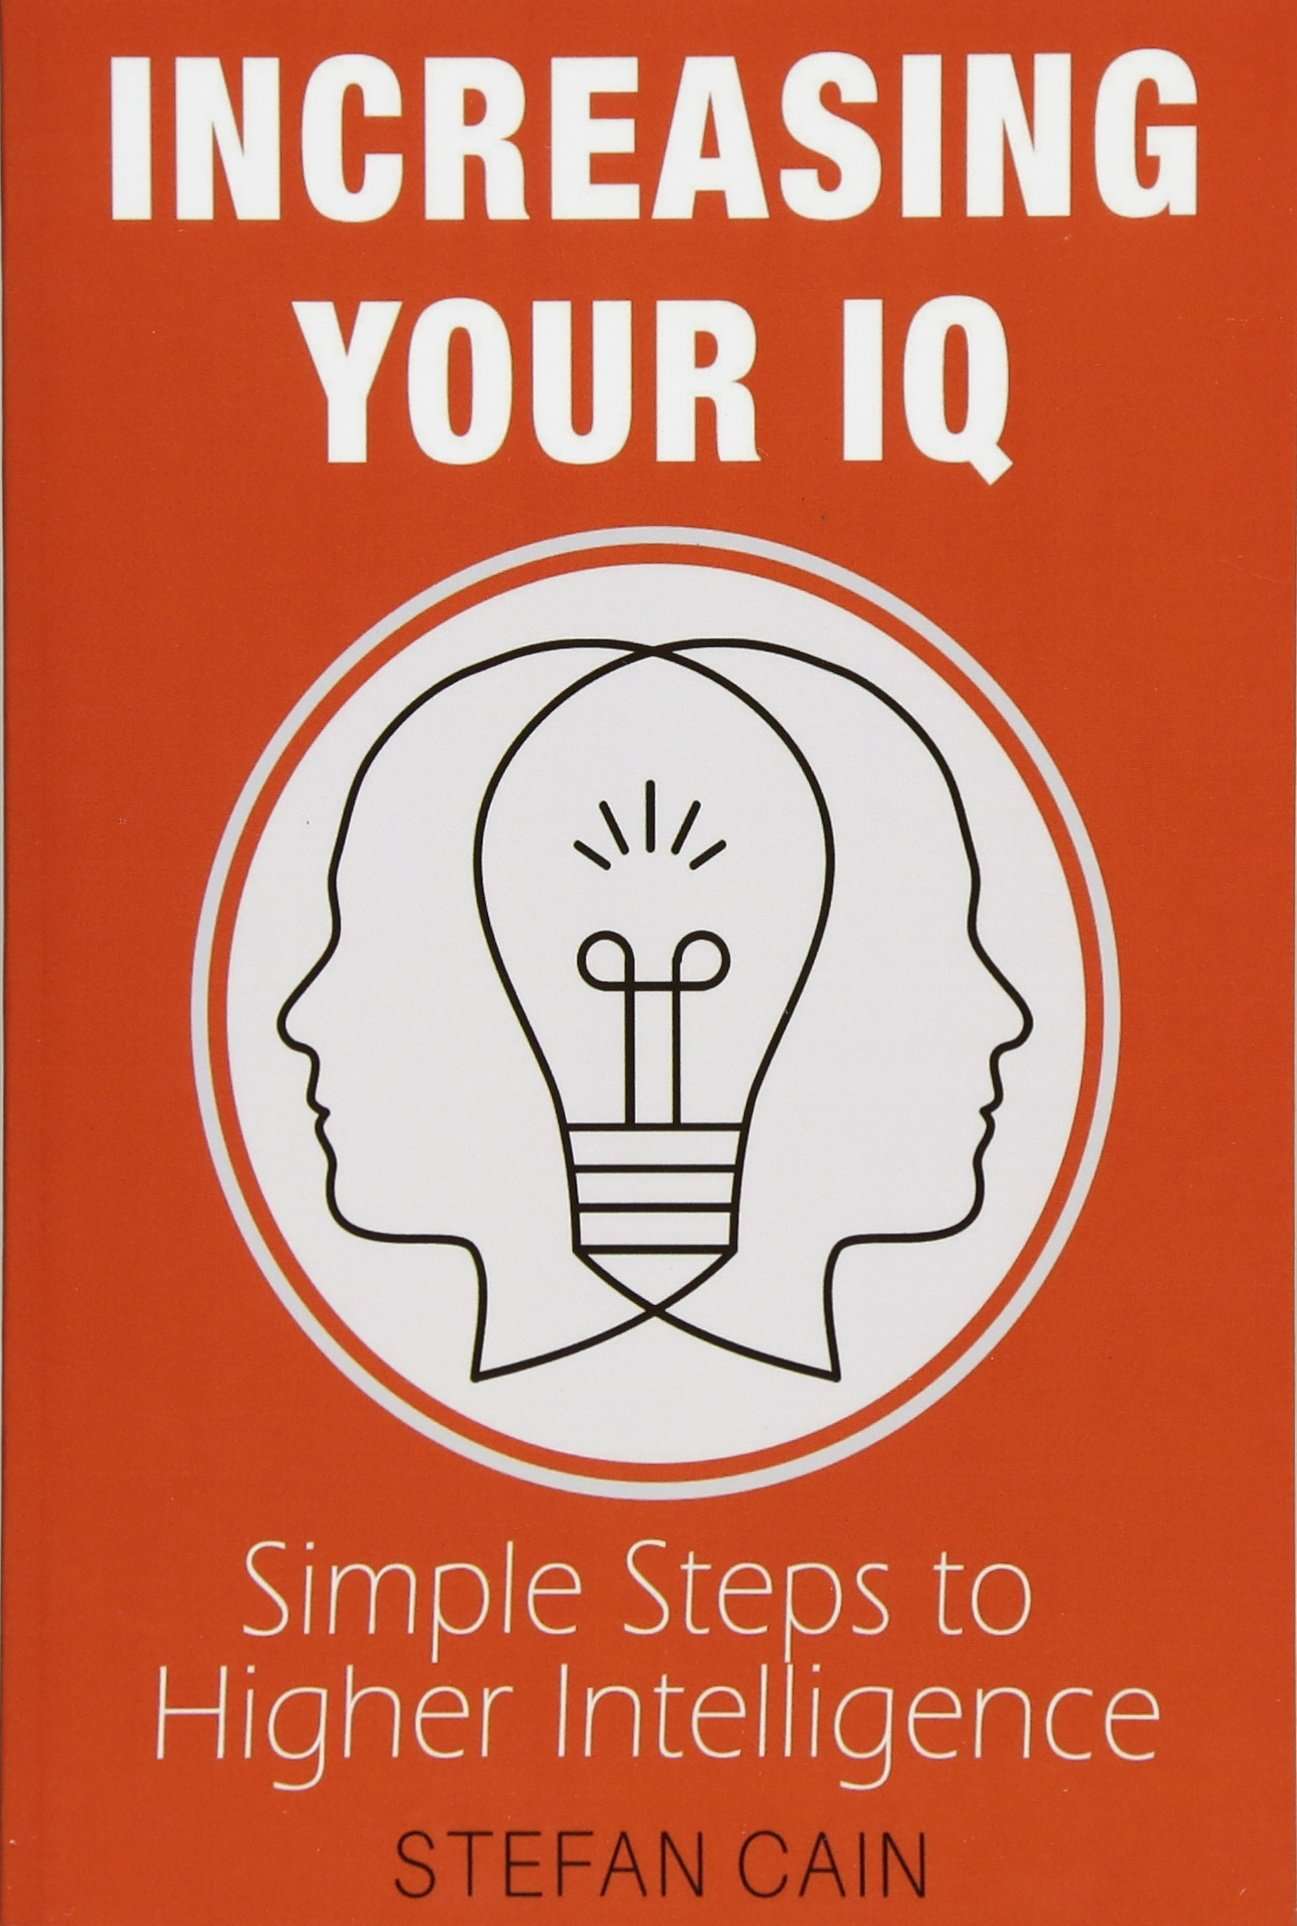 How To Increase Your Iq Level